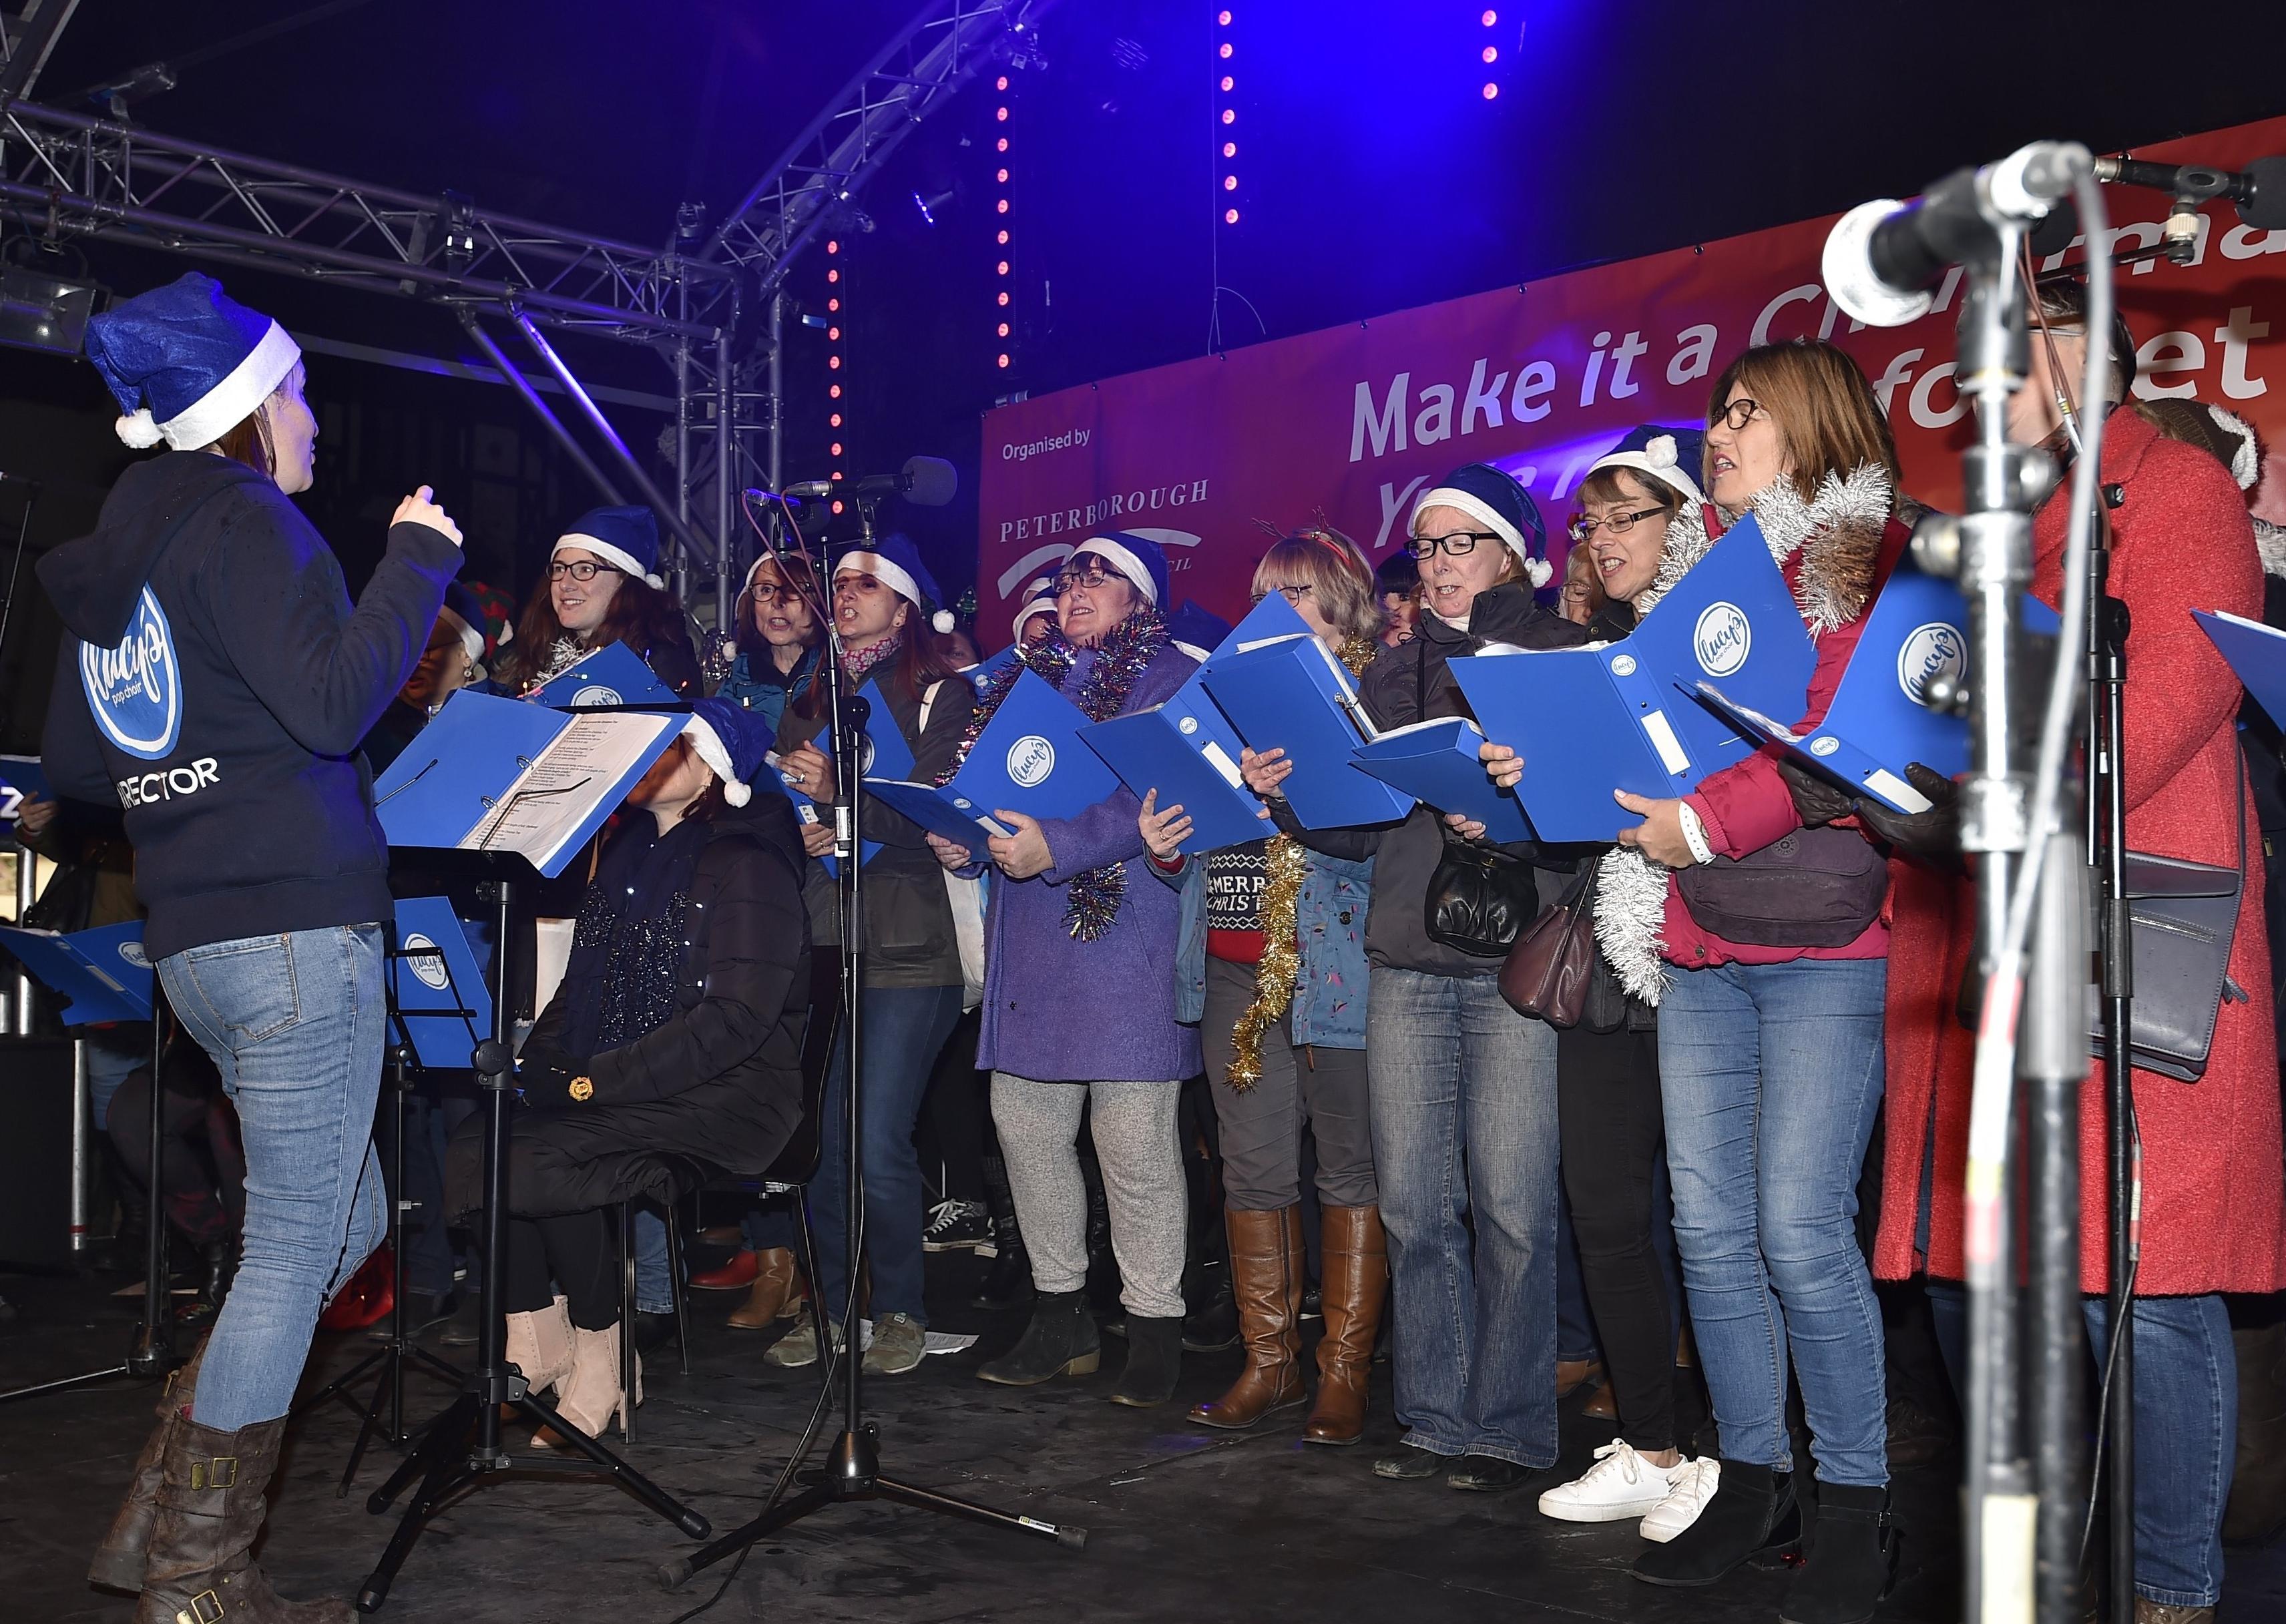 The lights turned on in Cathedral Square. Lucy's Pop Choir